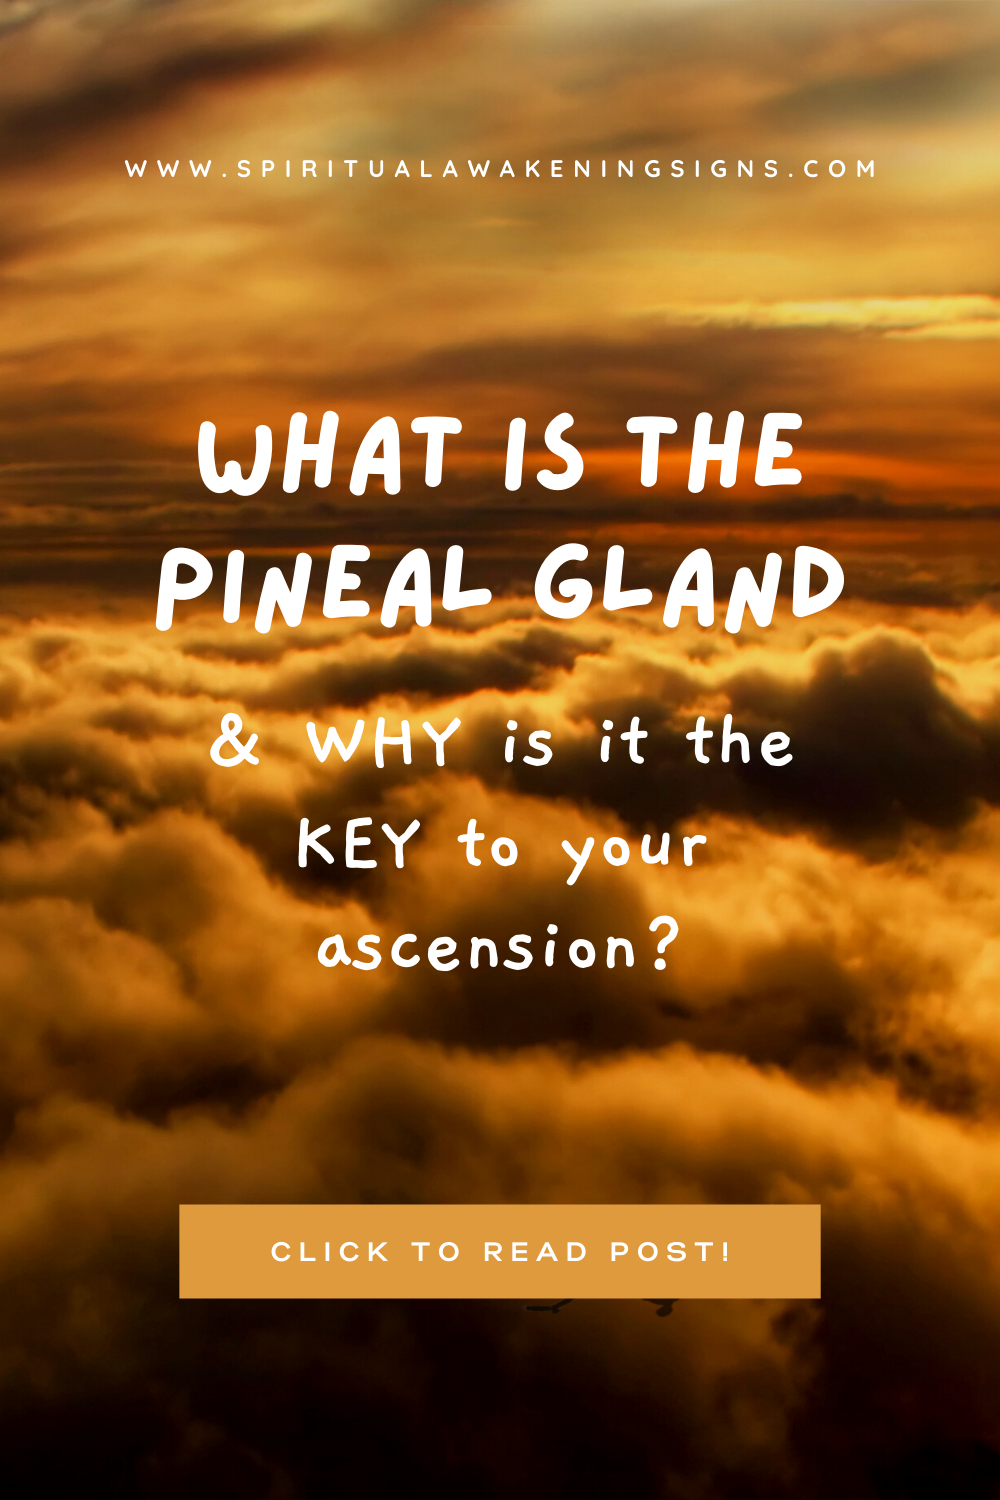 What IS The Pineal Gland (and WHY is it the KEY to your ascension?)